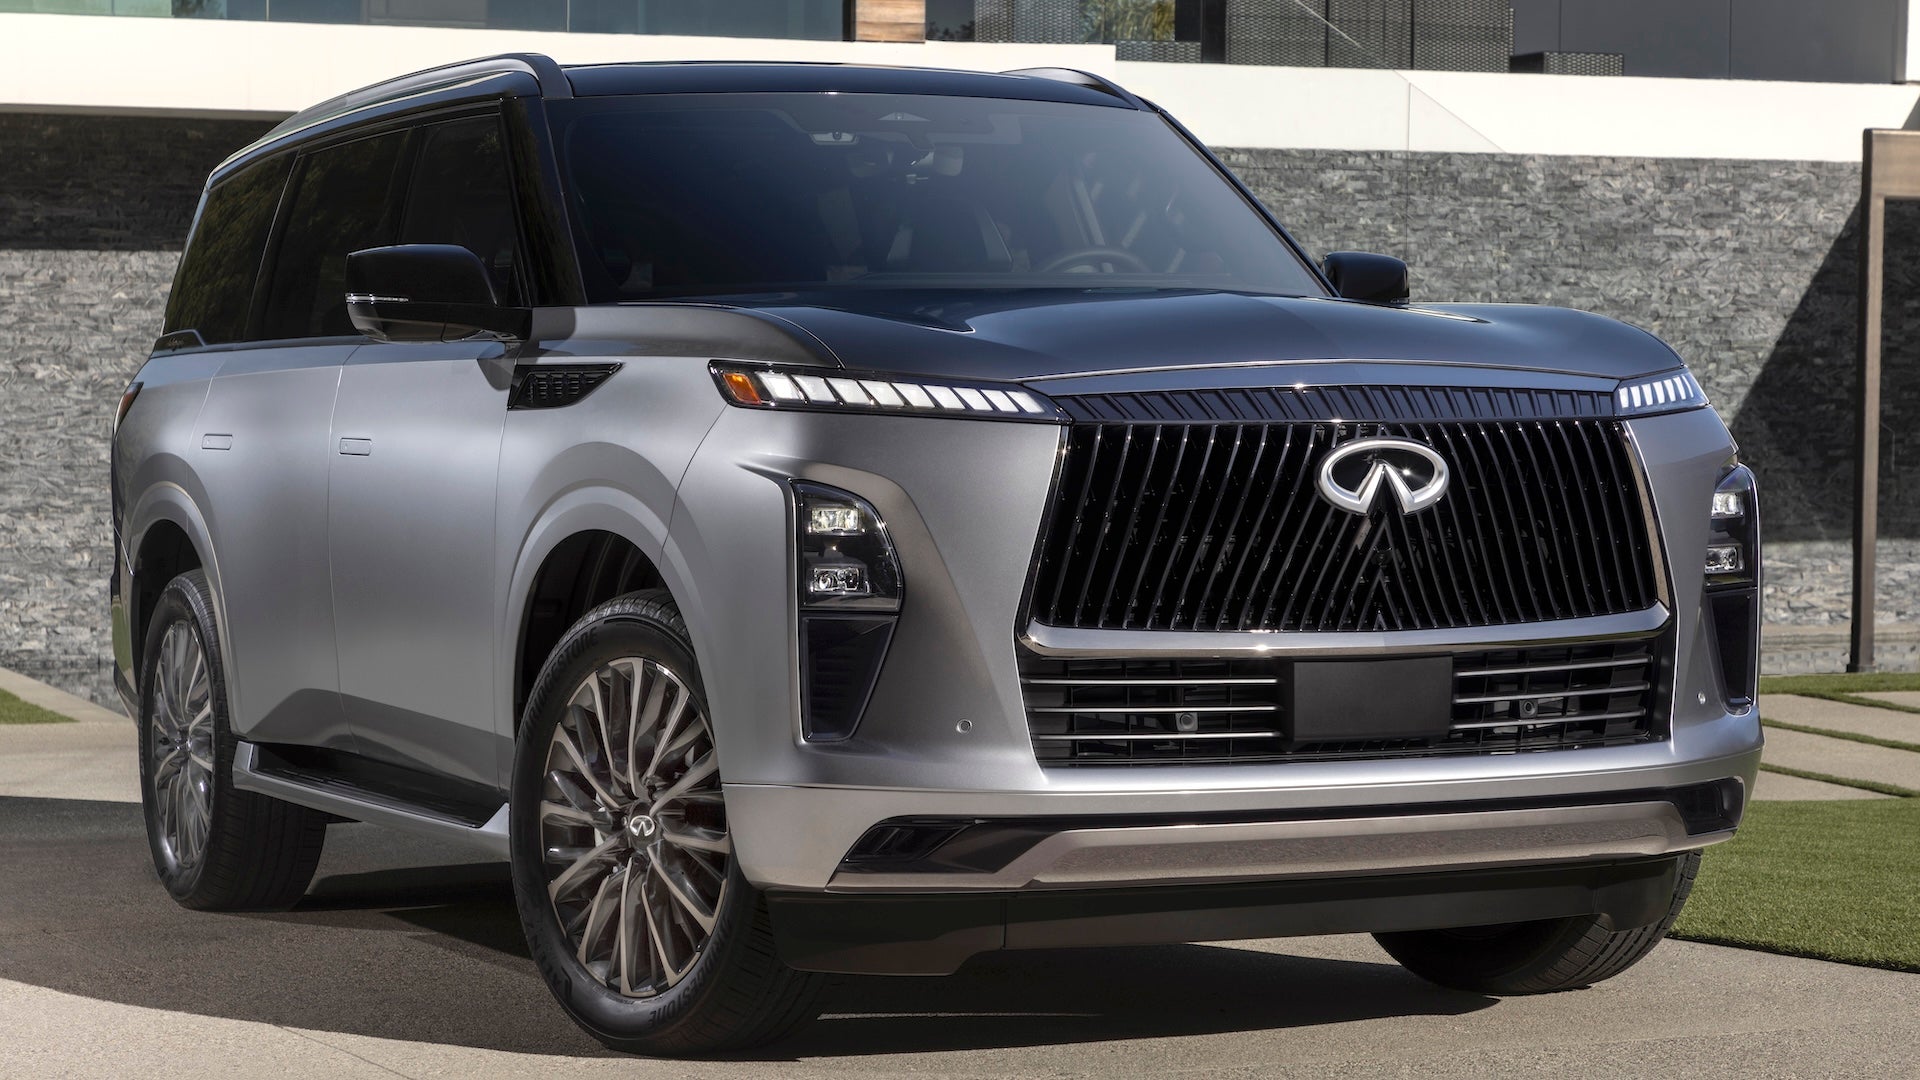 The 2025 Infiniti QX80 appears to be a significant leap ahead. It better deliver.